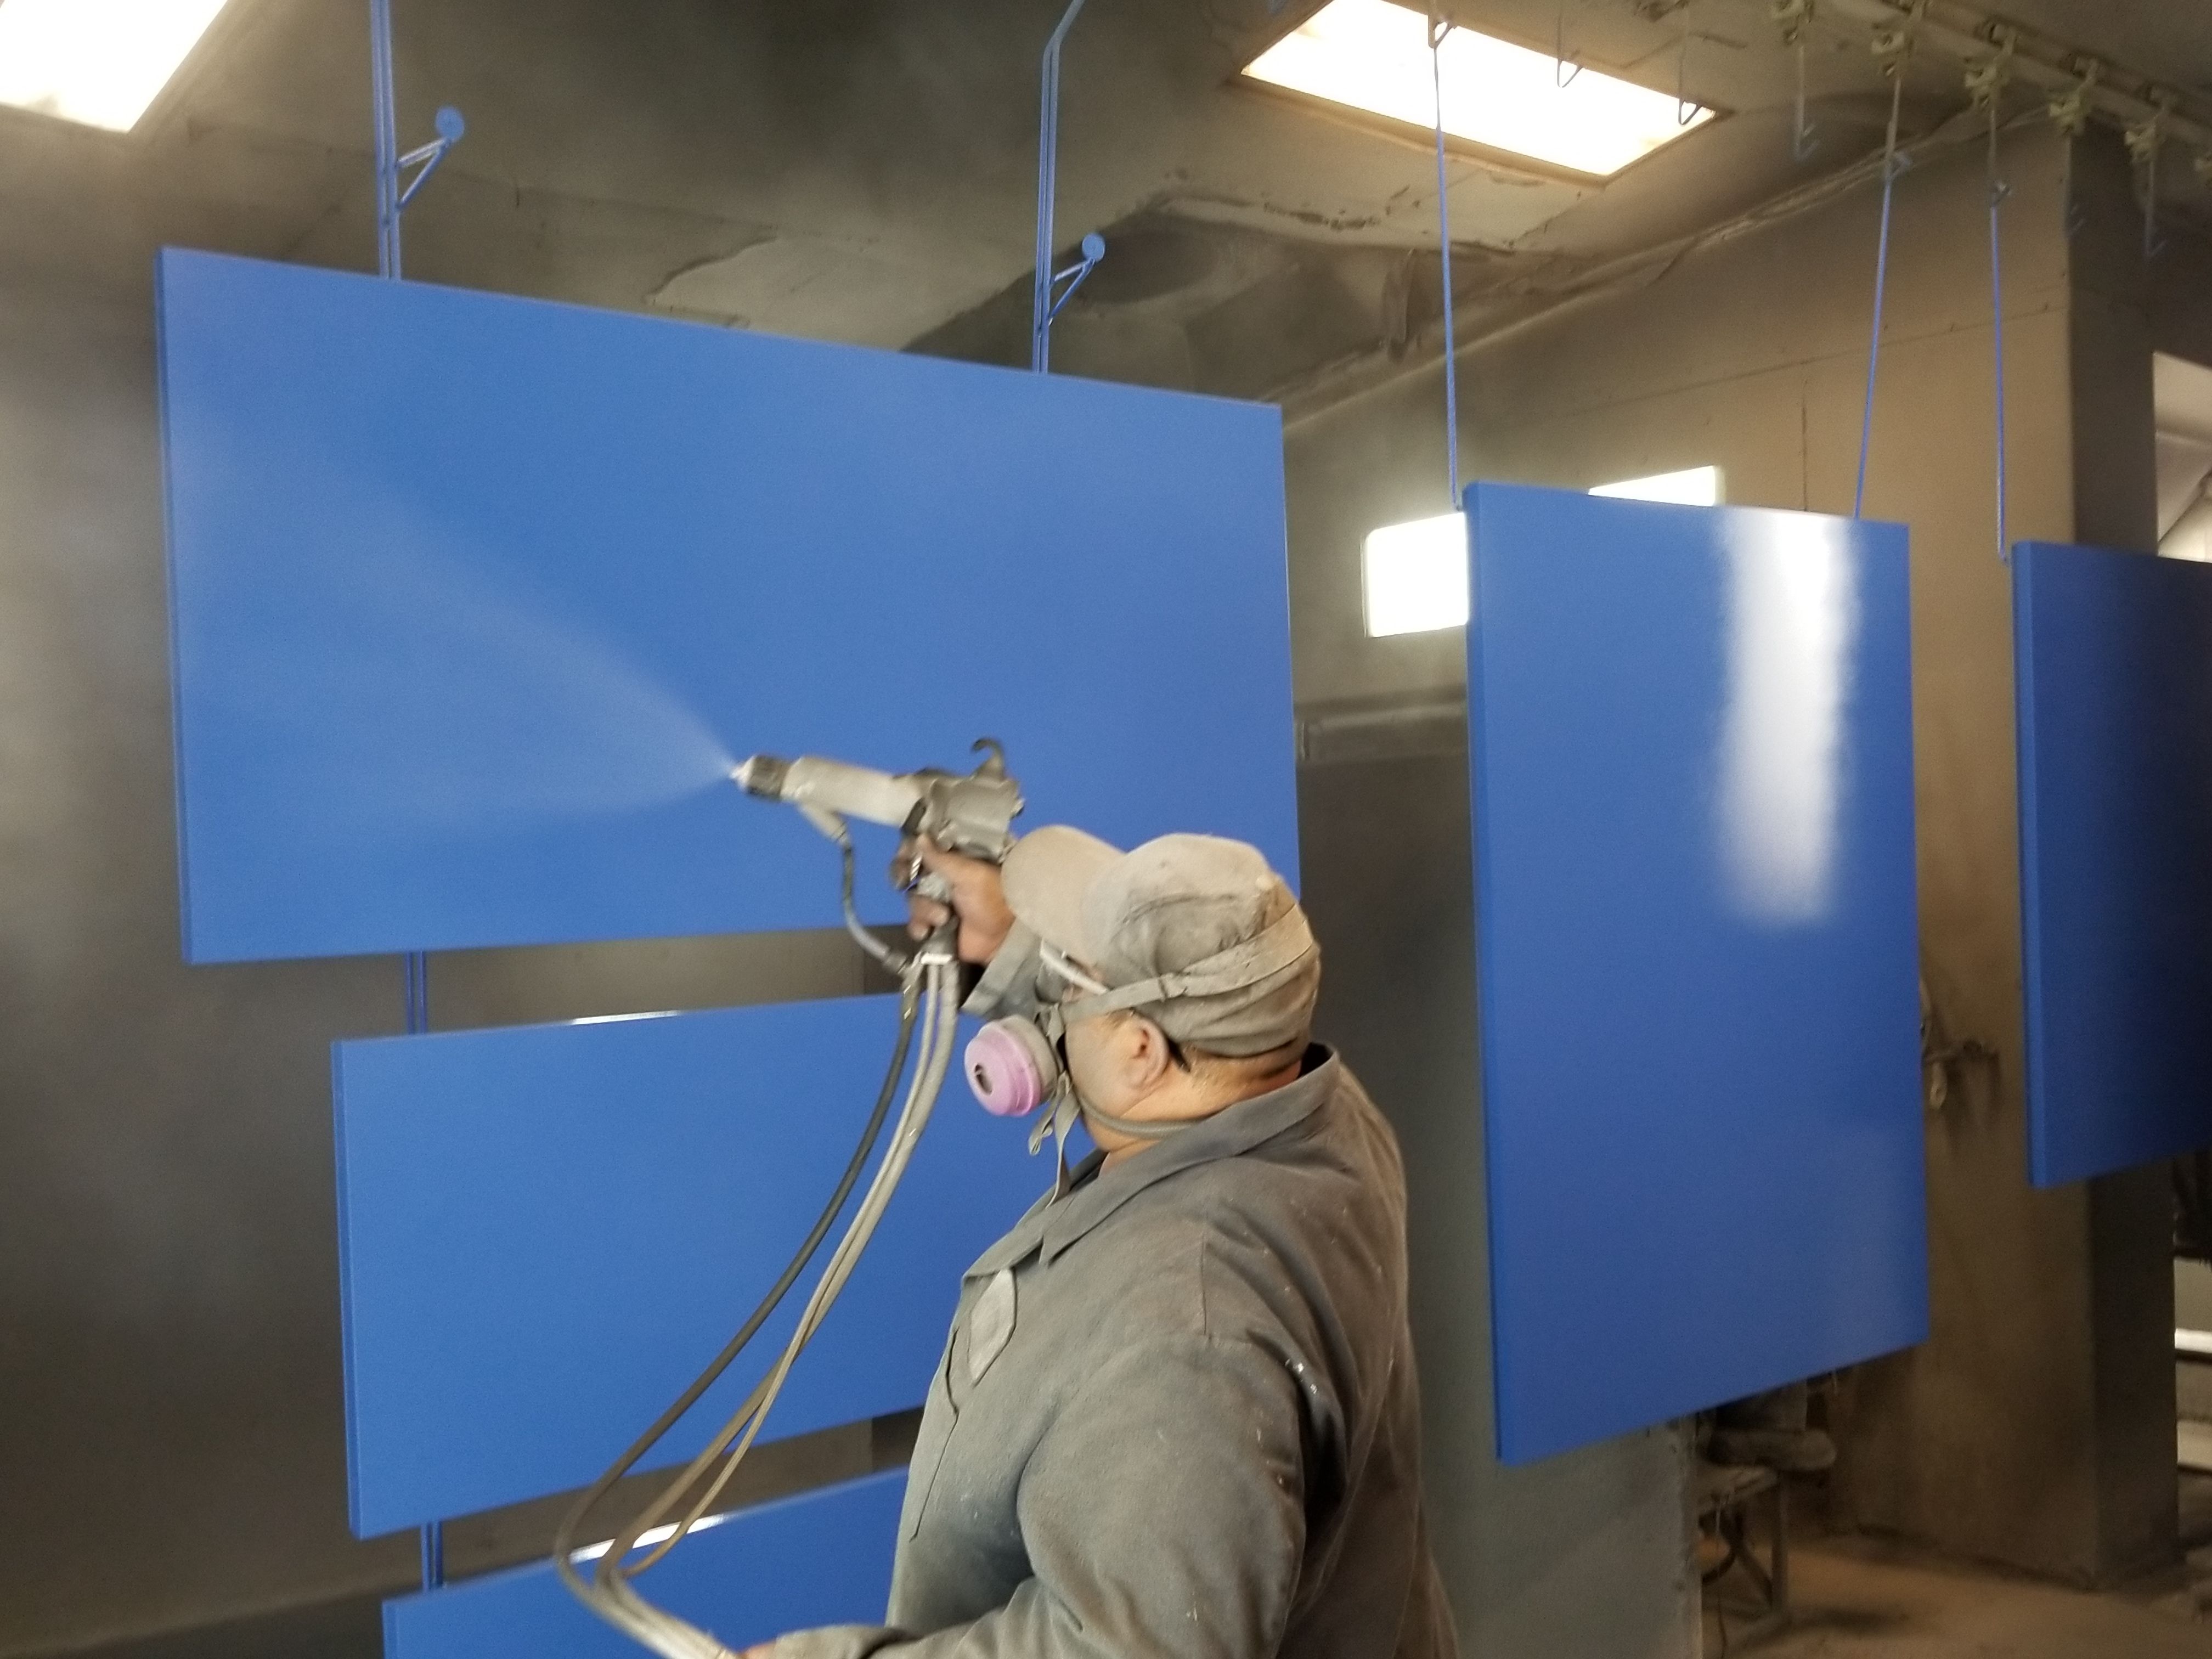 A member from the Certified Enameling, Inc. team coating panels blue